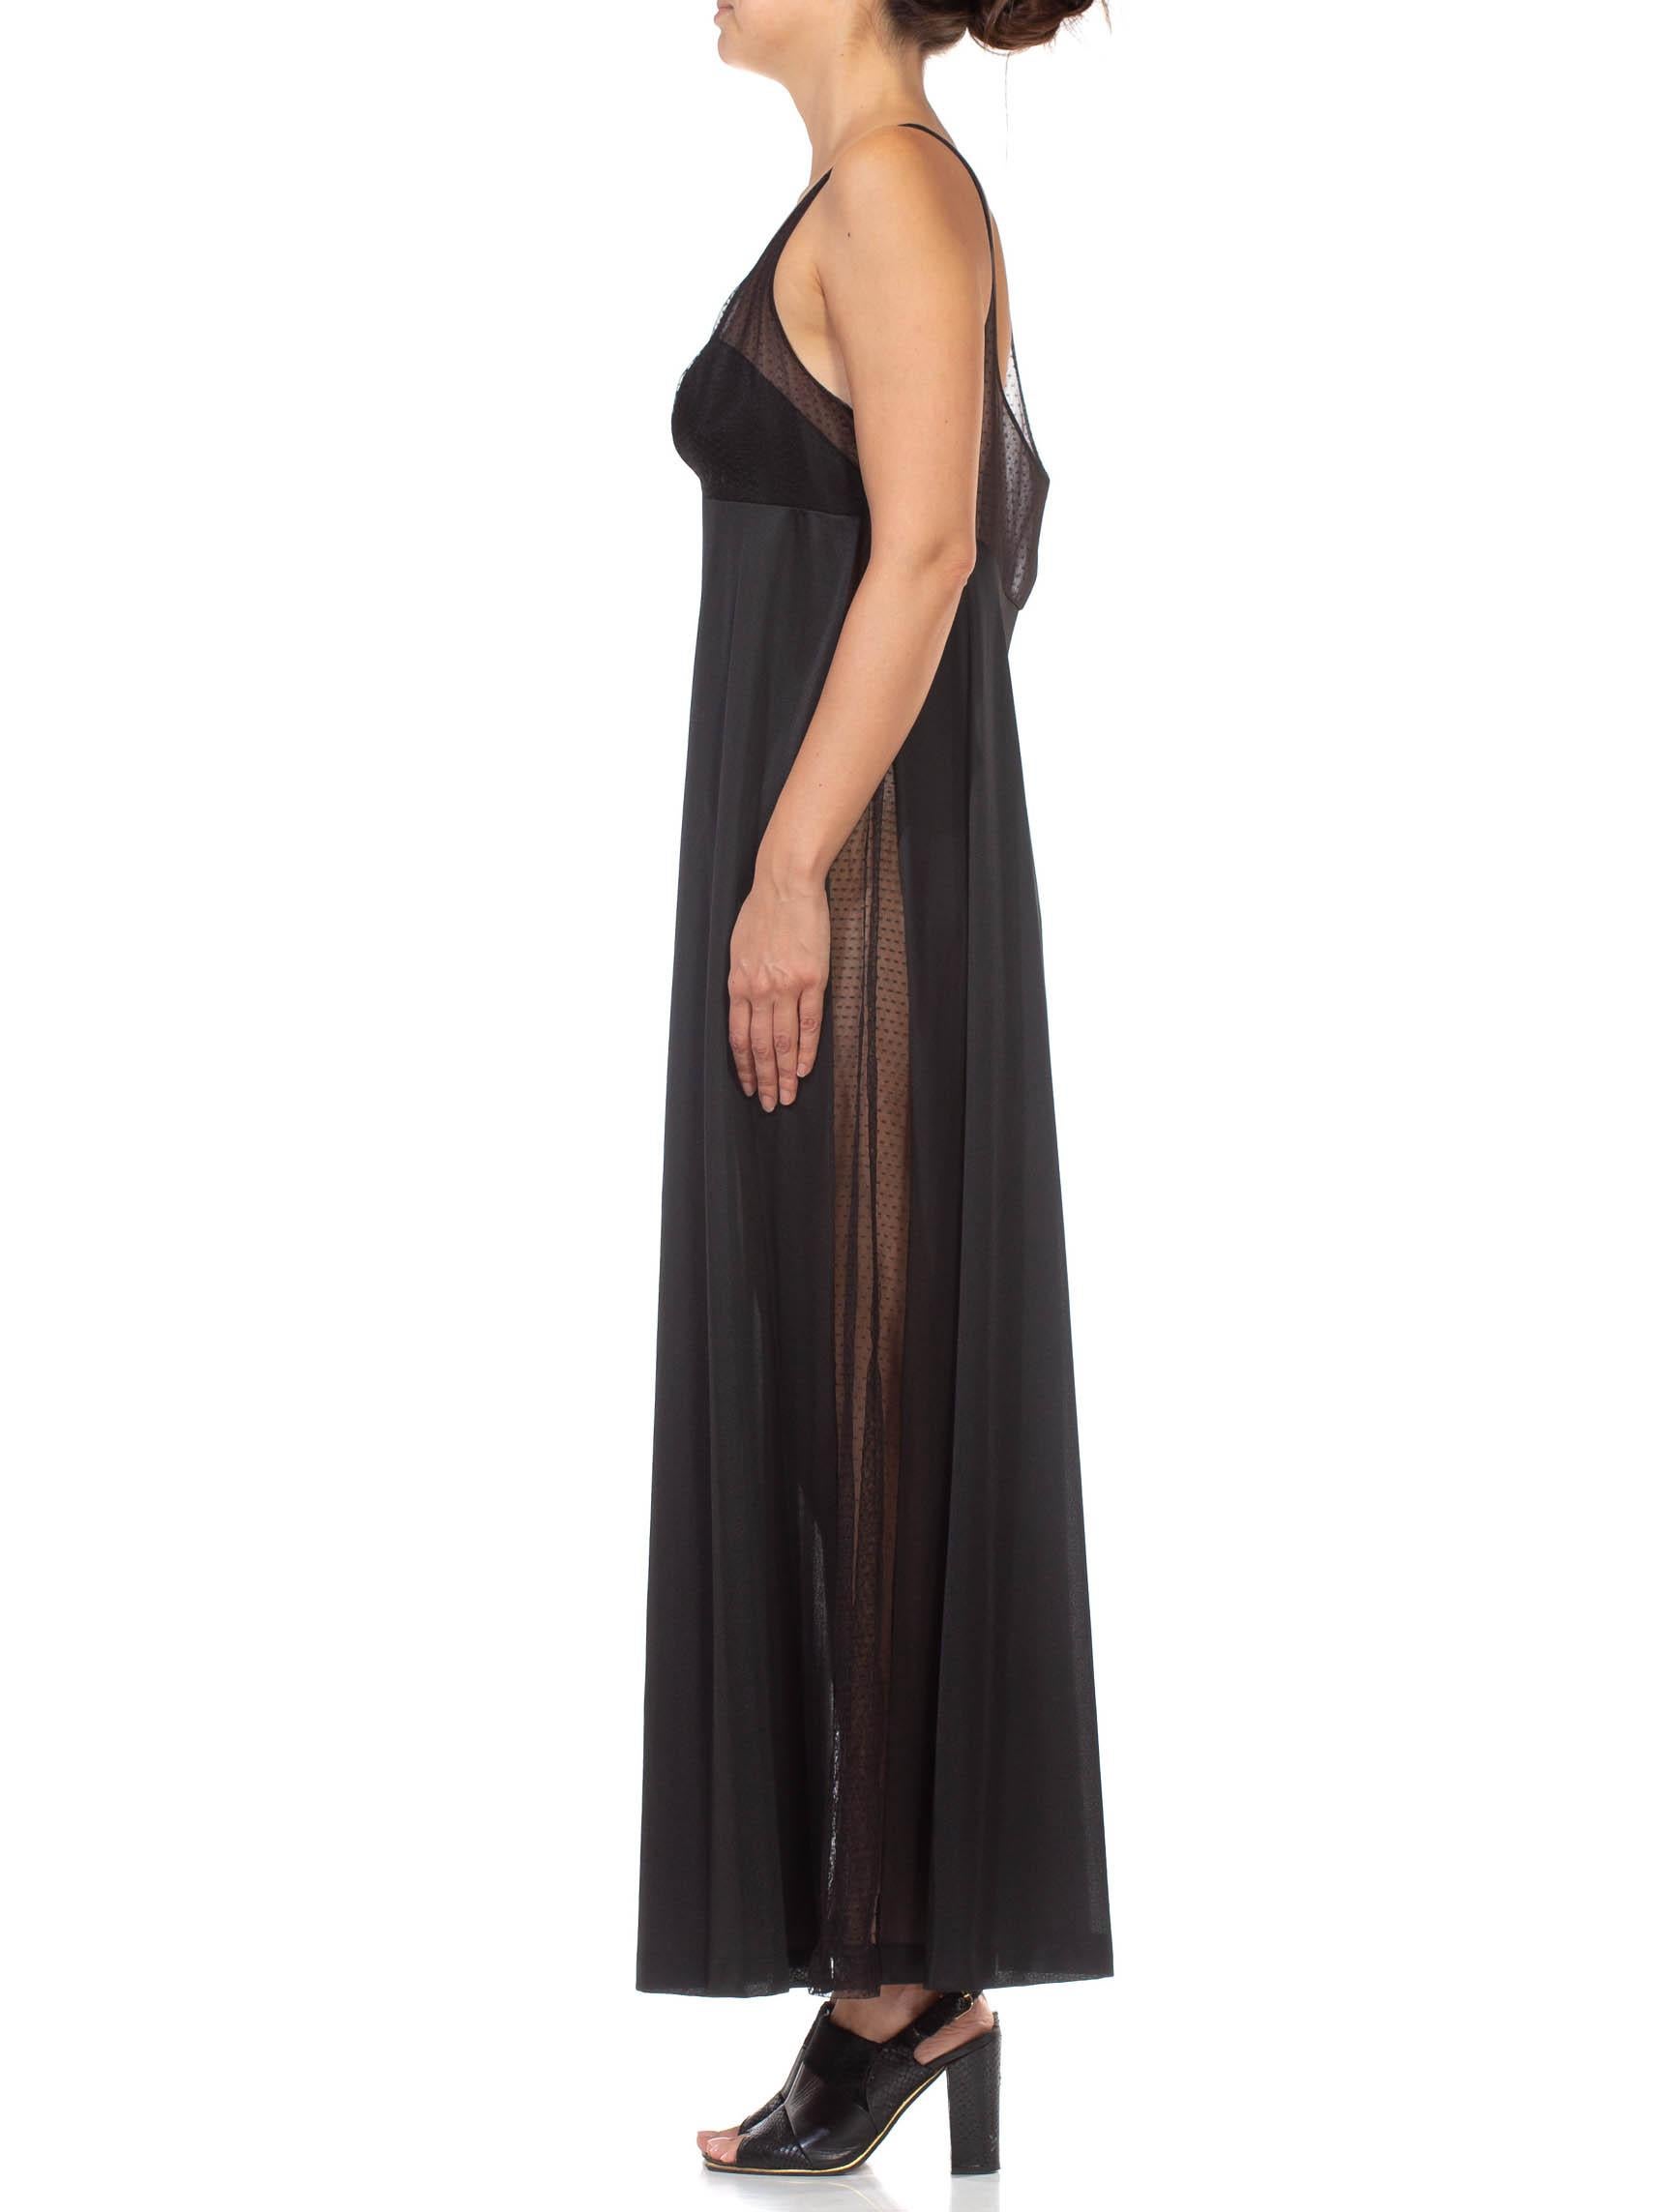 1970S Black Sheer Mesh Bodice Nylon Negligee Slip Dress In Excellent Condition For Sale In New York, NY